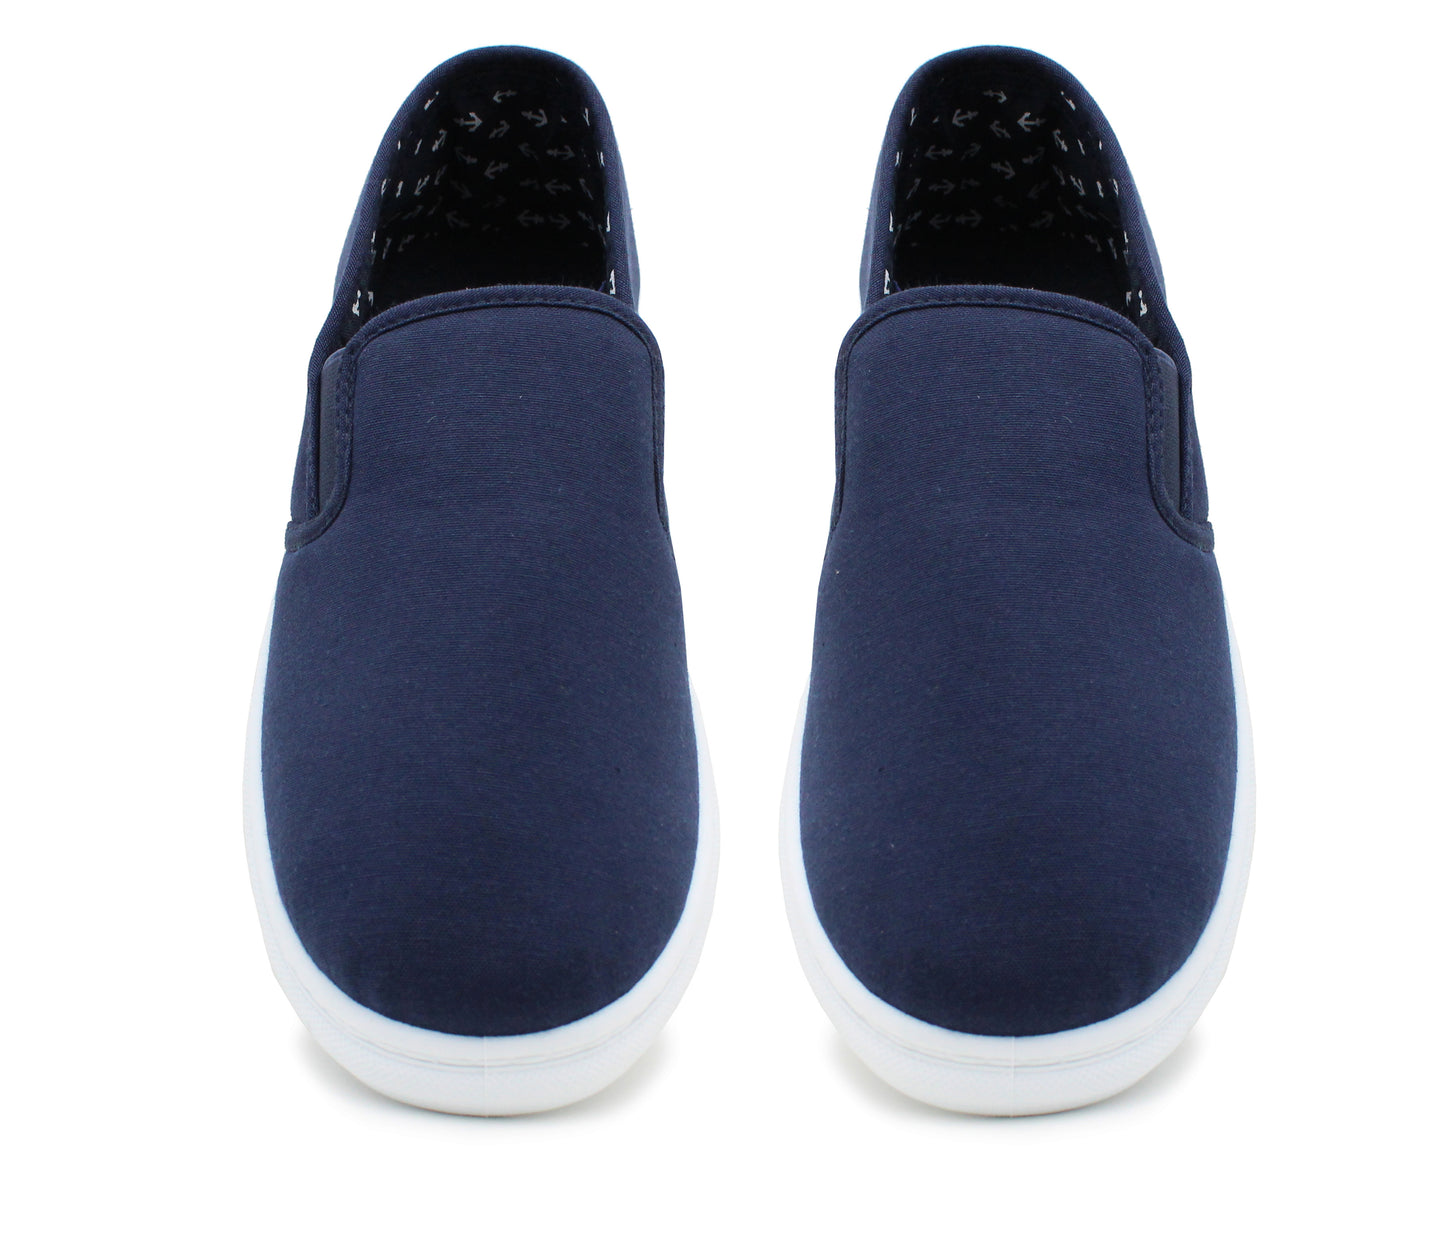 Mens Canvas Slip On Pumps Flat Elastic Gusset Loafers Casual Trainers Sneaker Deck Shoes